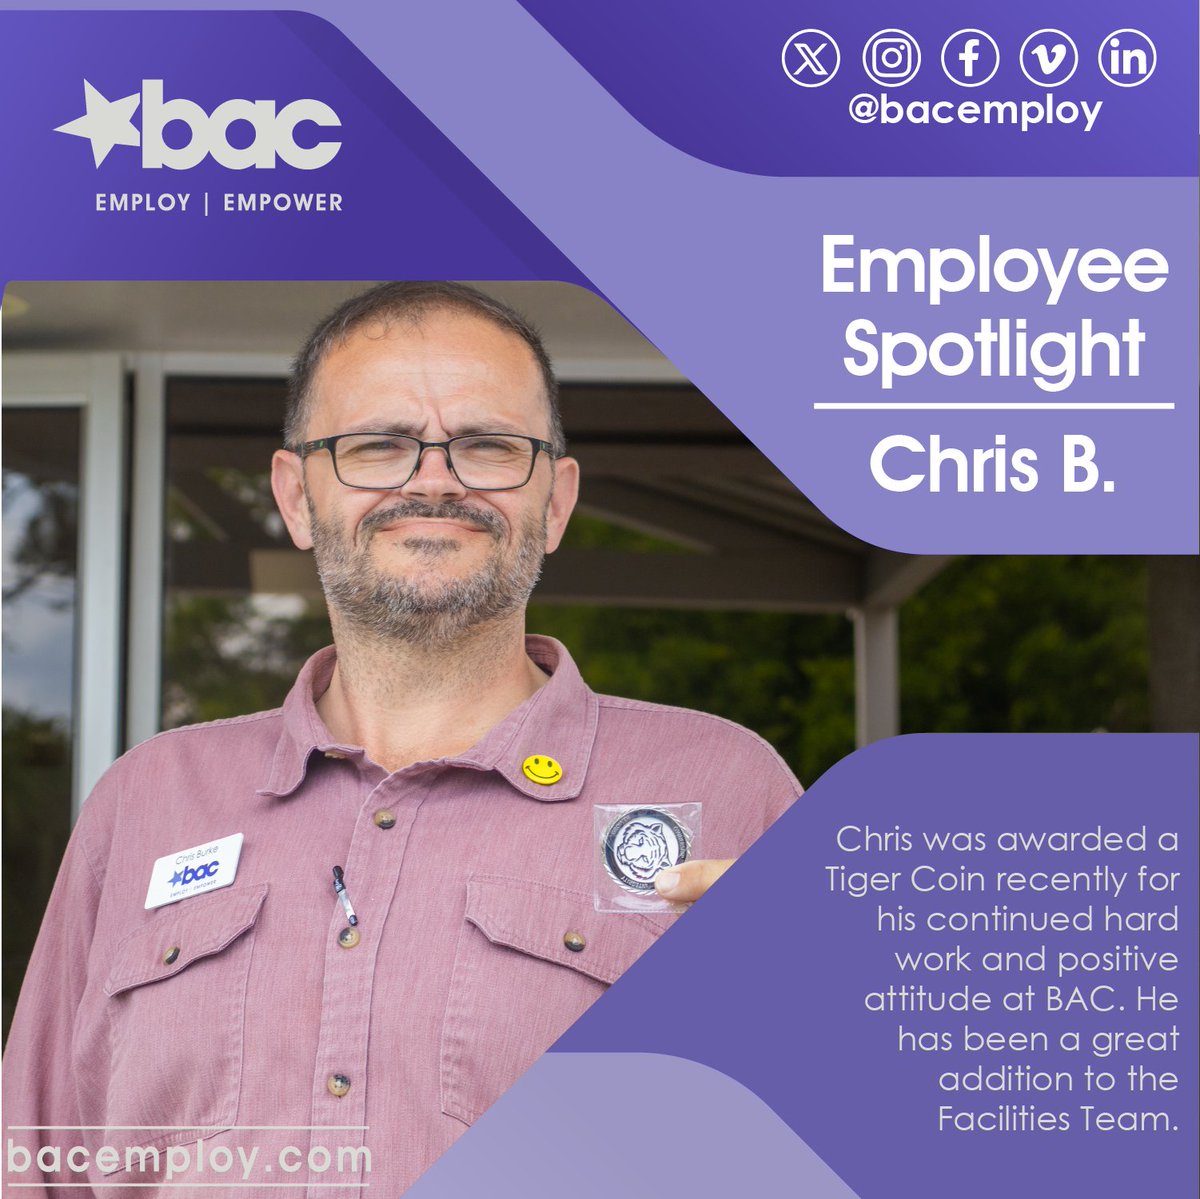 #TeamTuesday!
A huge shoutout to Chris, one of our outstanding BAC team members at our Rockledge Headquarters!  Chris has been awarded a well-deserved Tiger Coin for his unwavering dedication, incredible work ethic, and contagious positivity. #PowerOfBAC #EmployEmpower